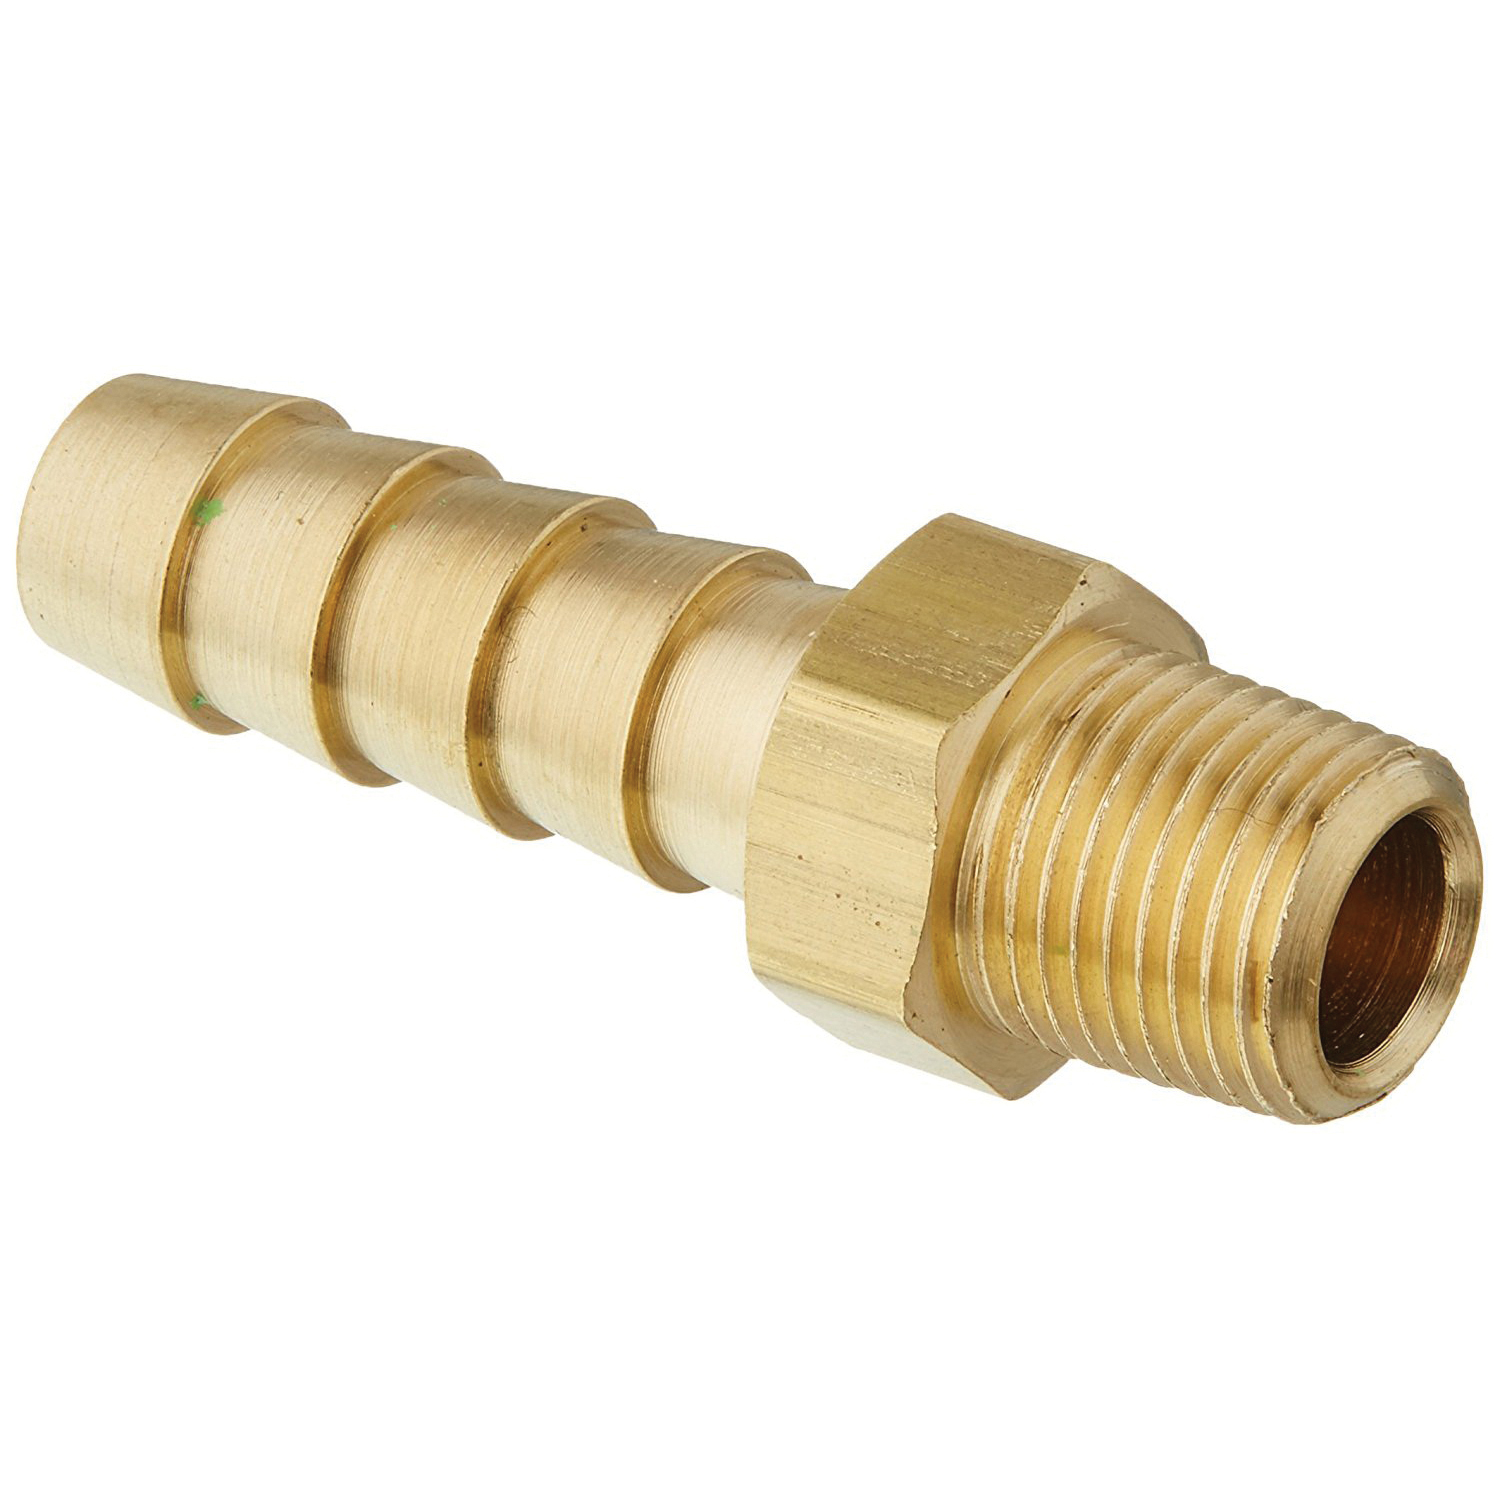 Yellow Jacket® 78064 Adapter, 1/8 in, Barbed x MPT Connection